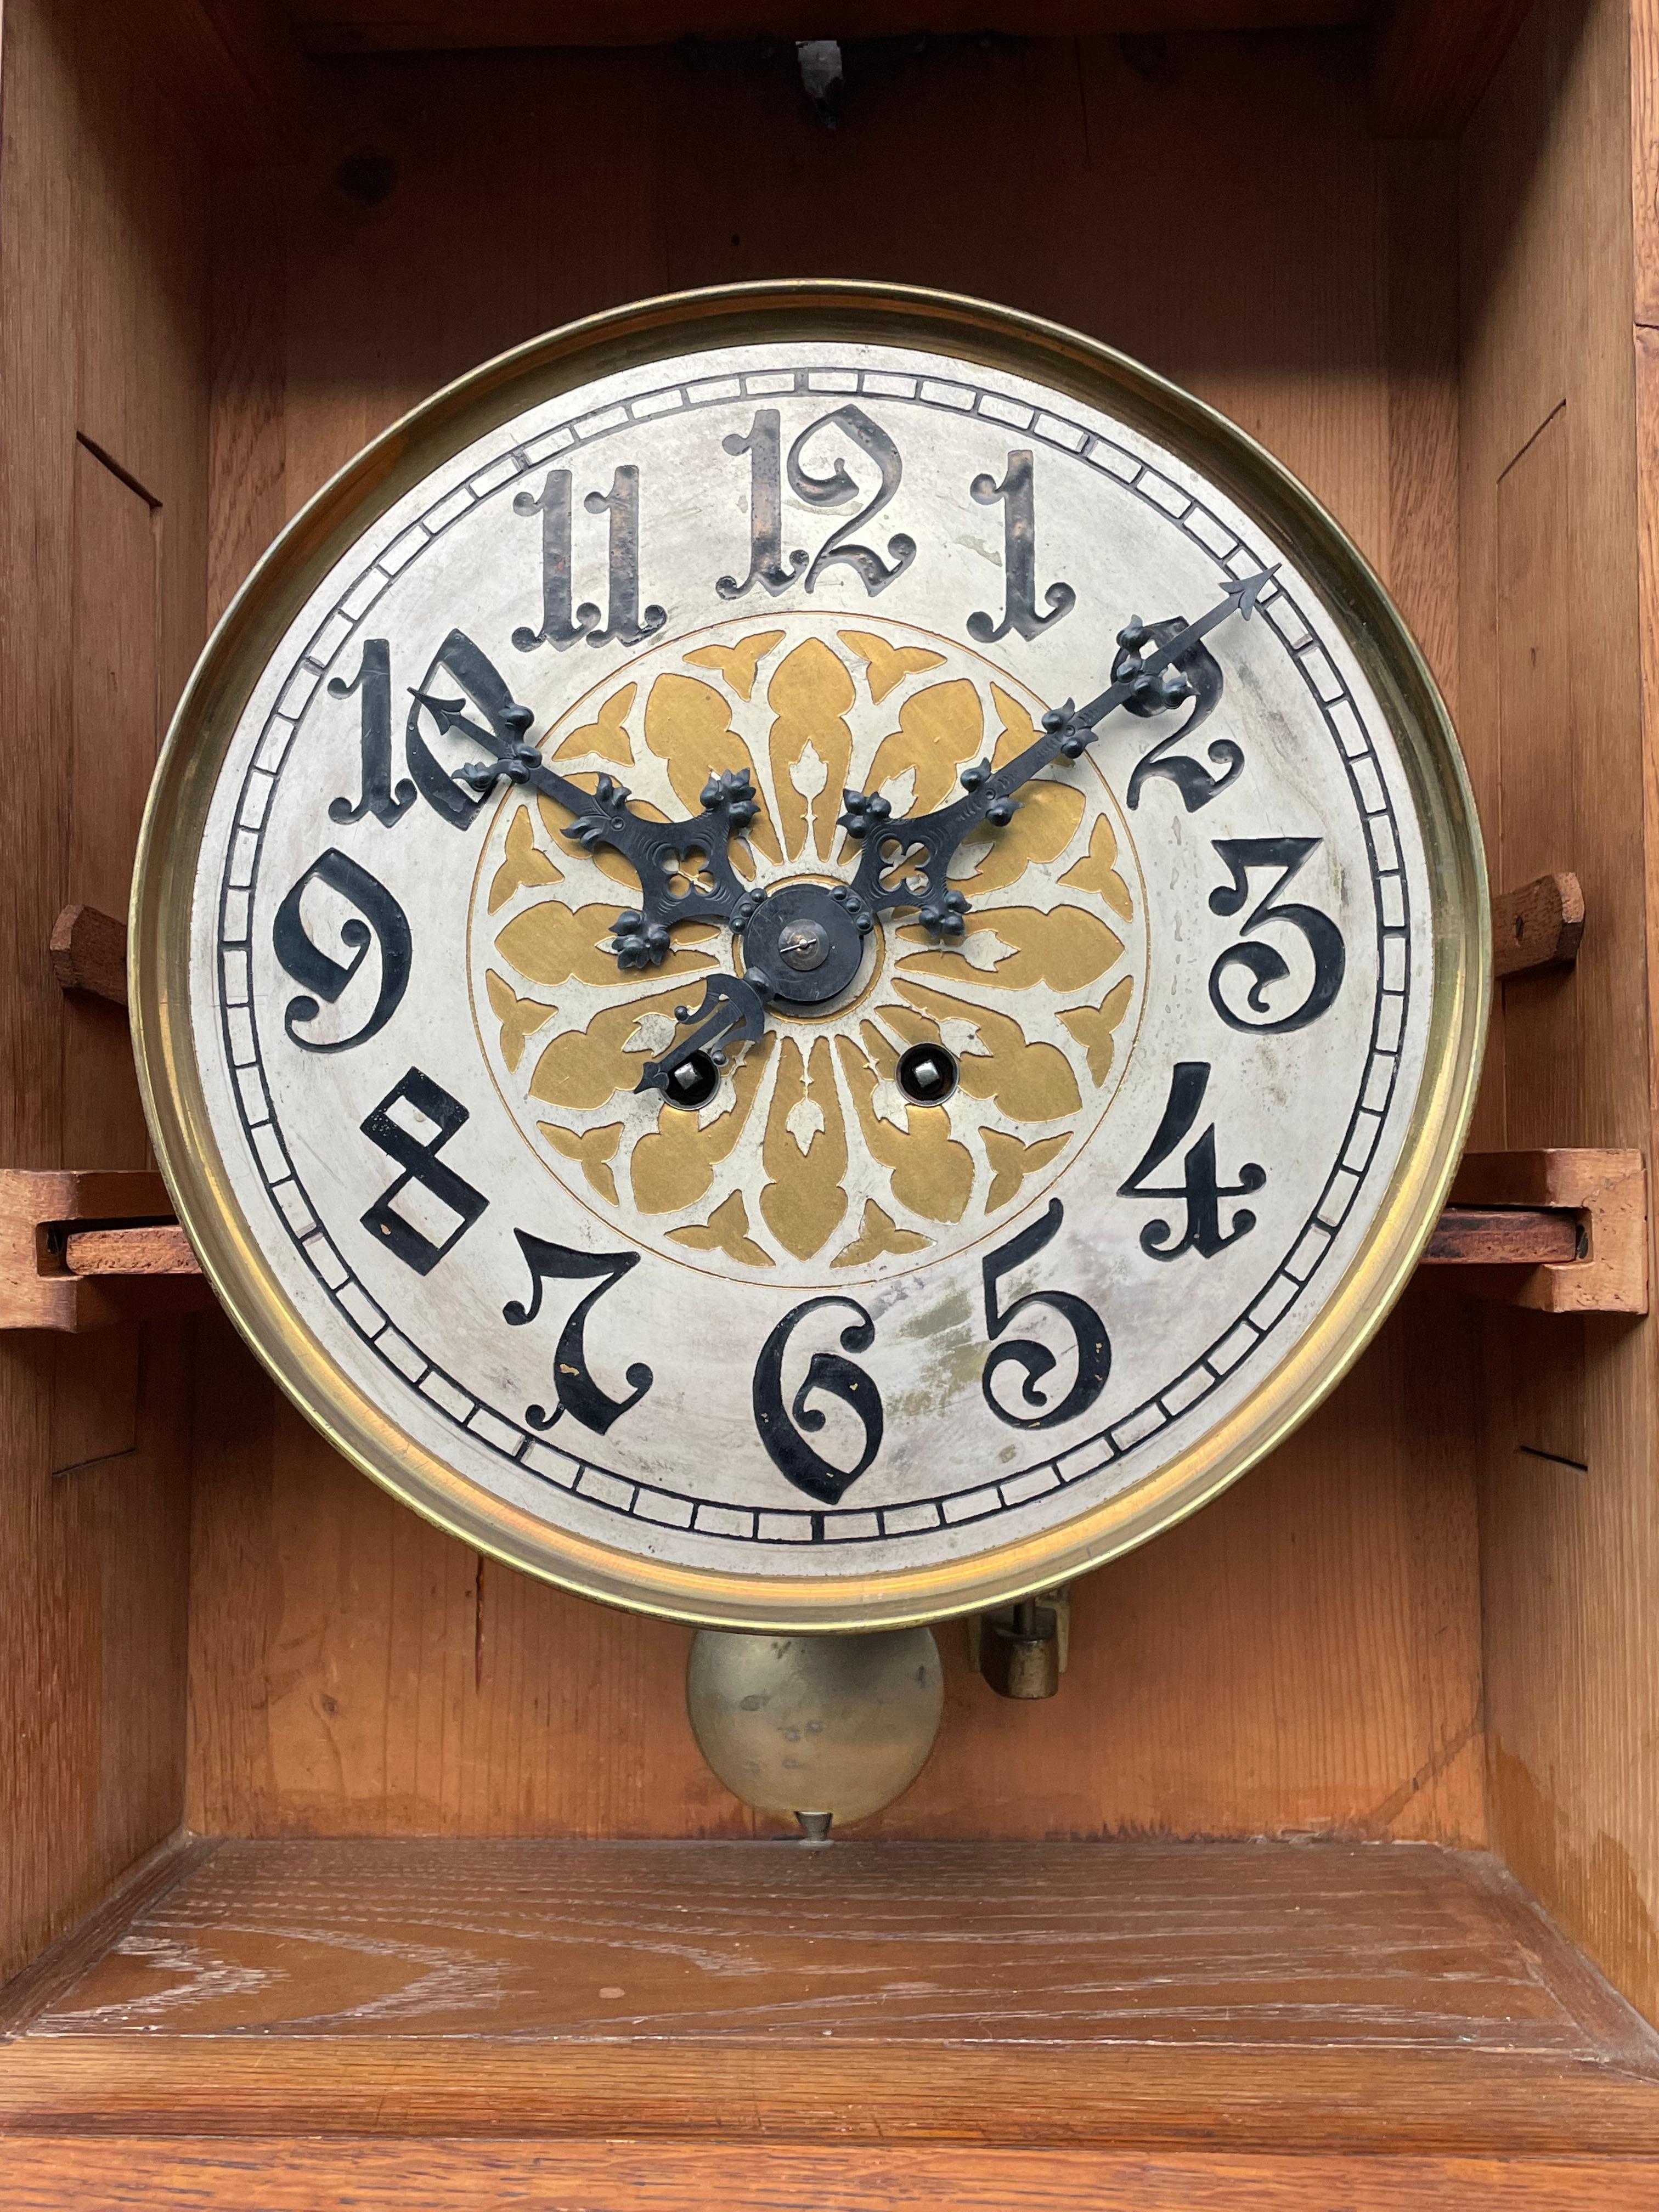 Rare & Large Antique Hand Carved Gothic Revival Wall Clock w. Lenzkirch Movement For Sale 5